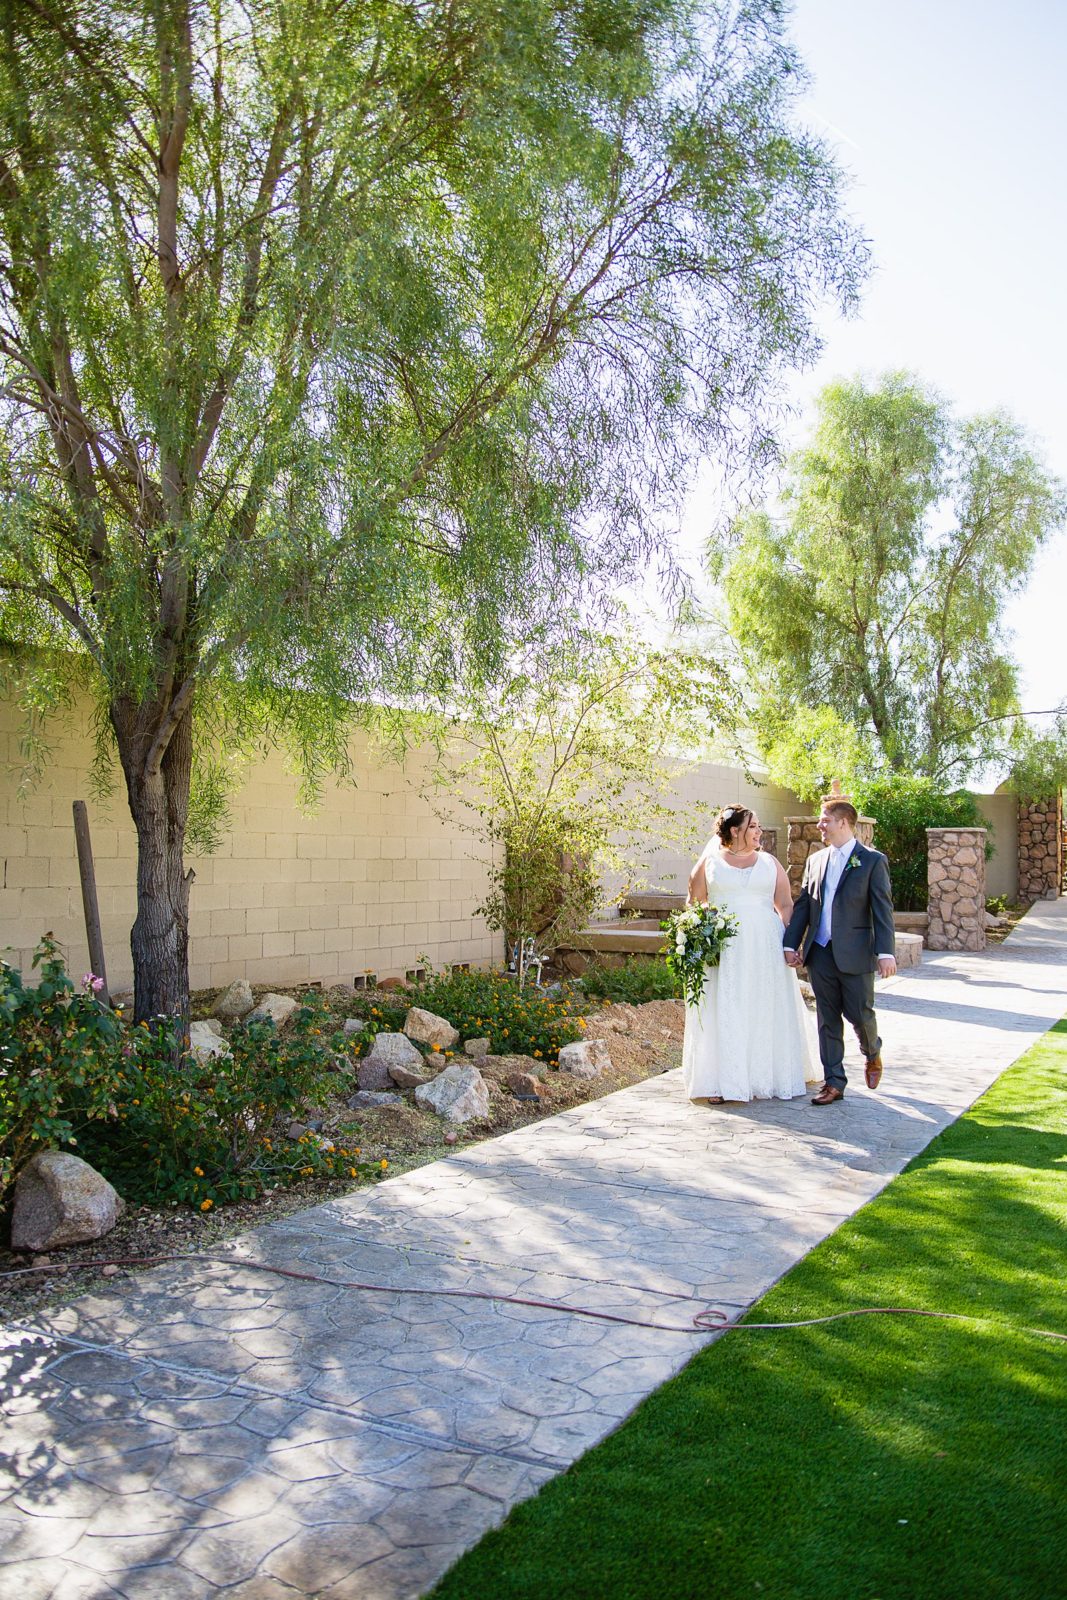 Bride and Groom walking together during their Superstition Manor wedding by Arizona wedding photographer PMA Photography.